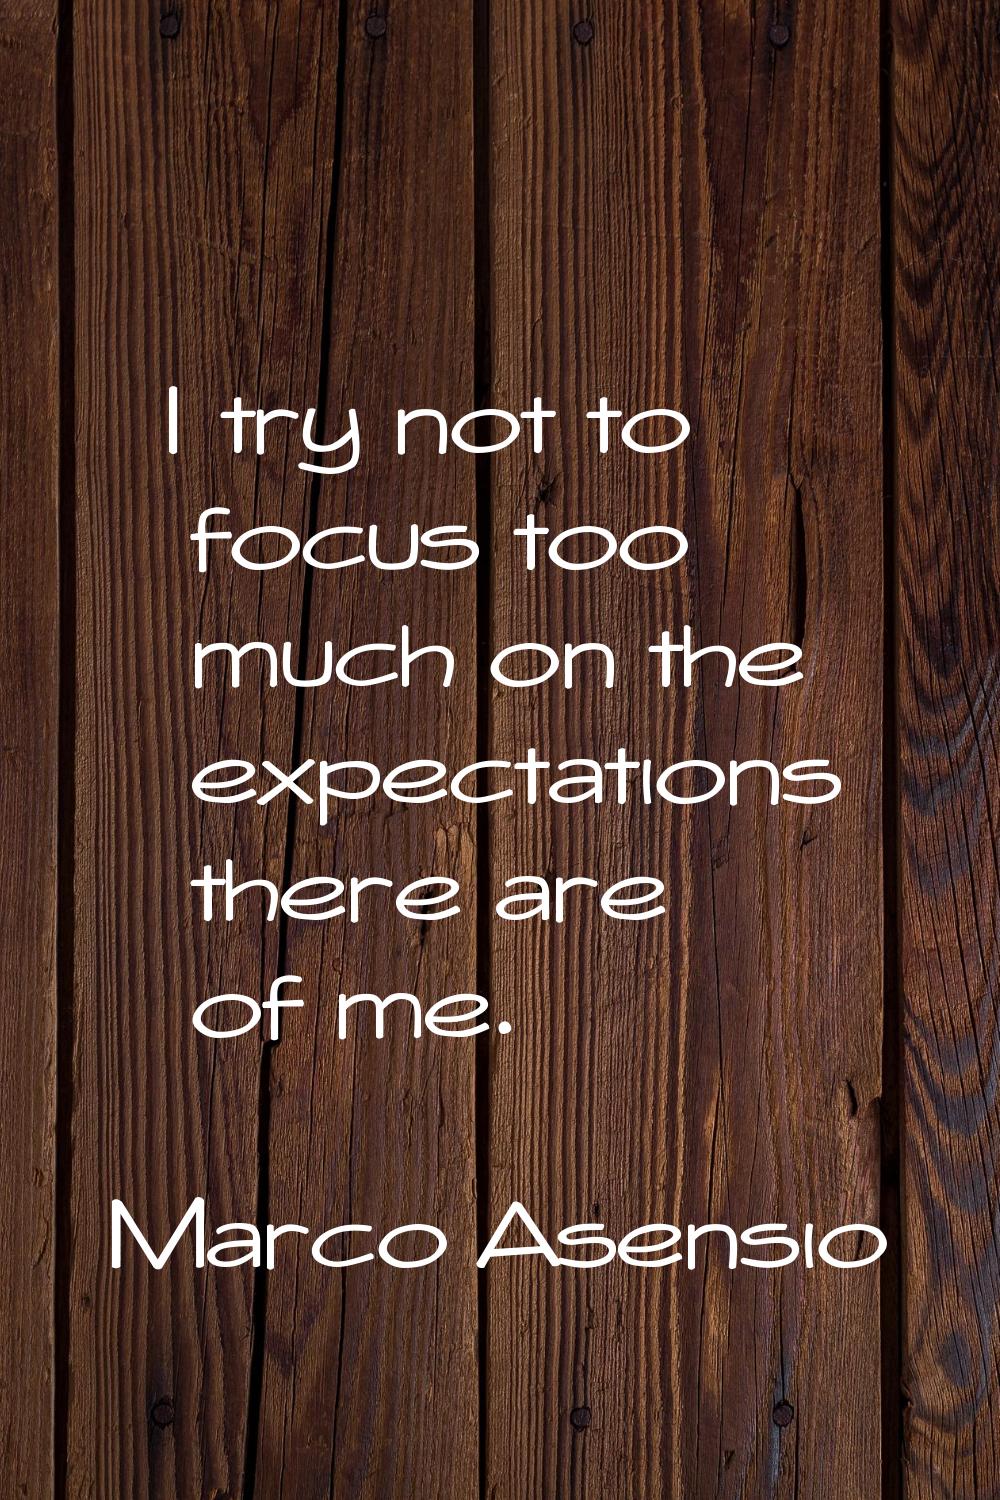 I try not to focus too much on the expectations there are of me.